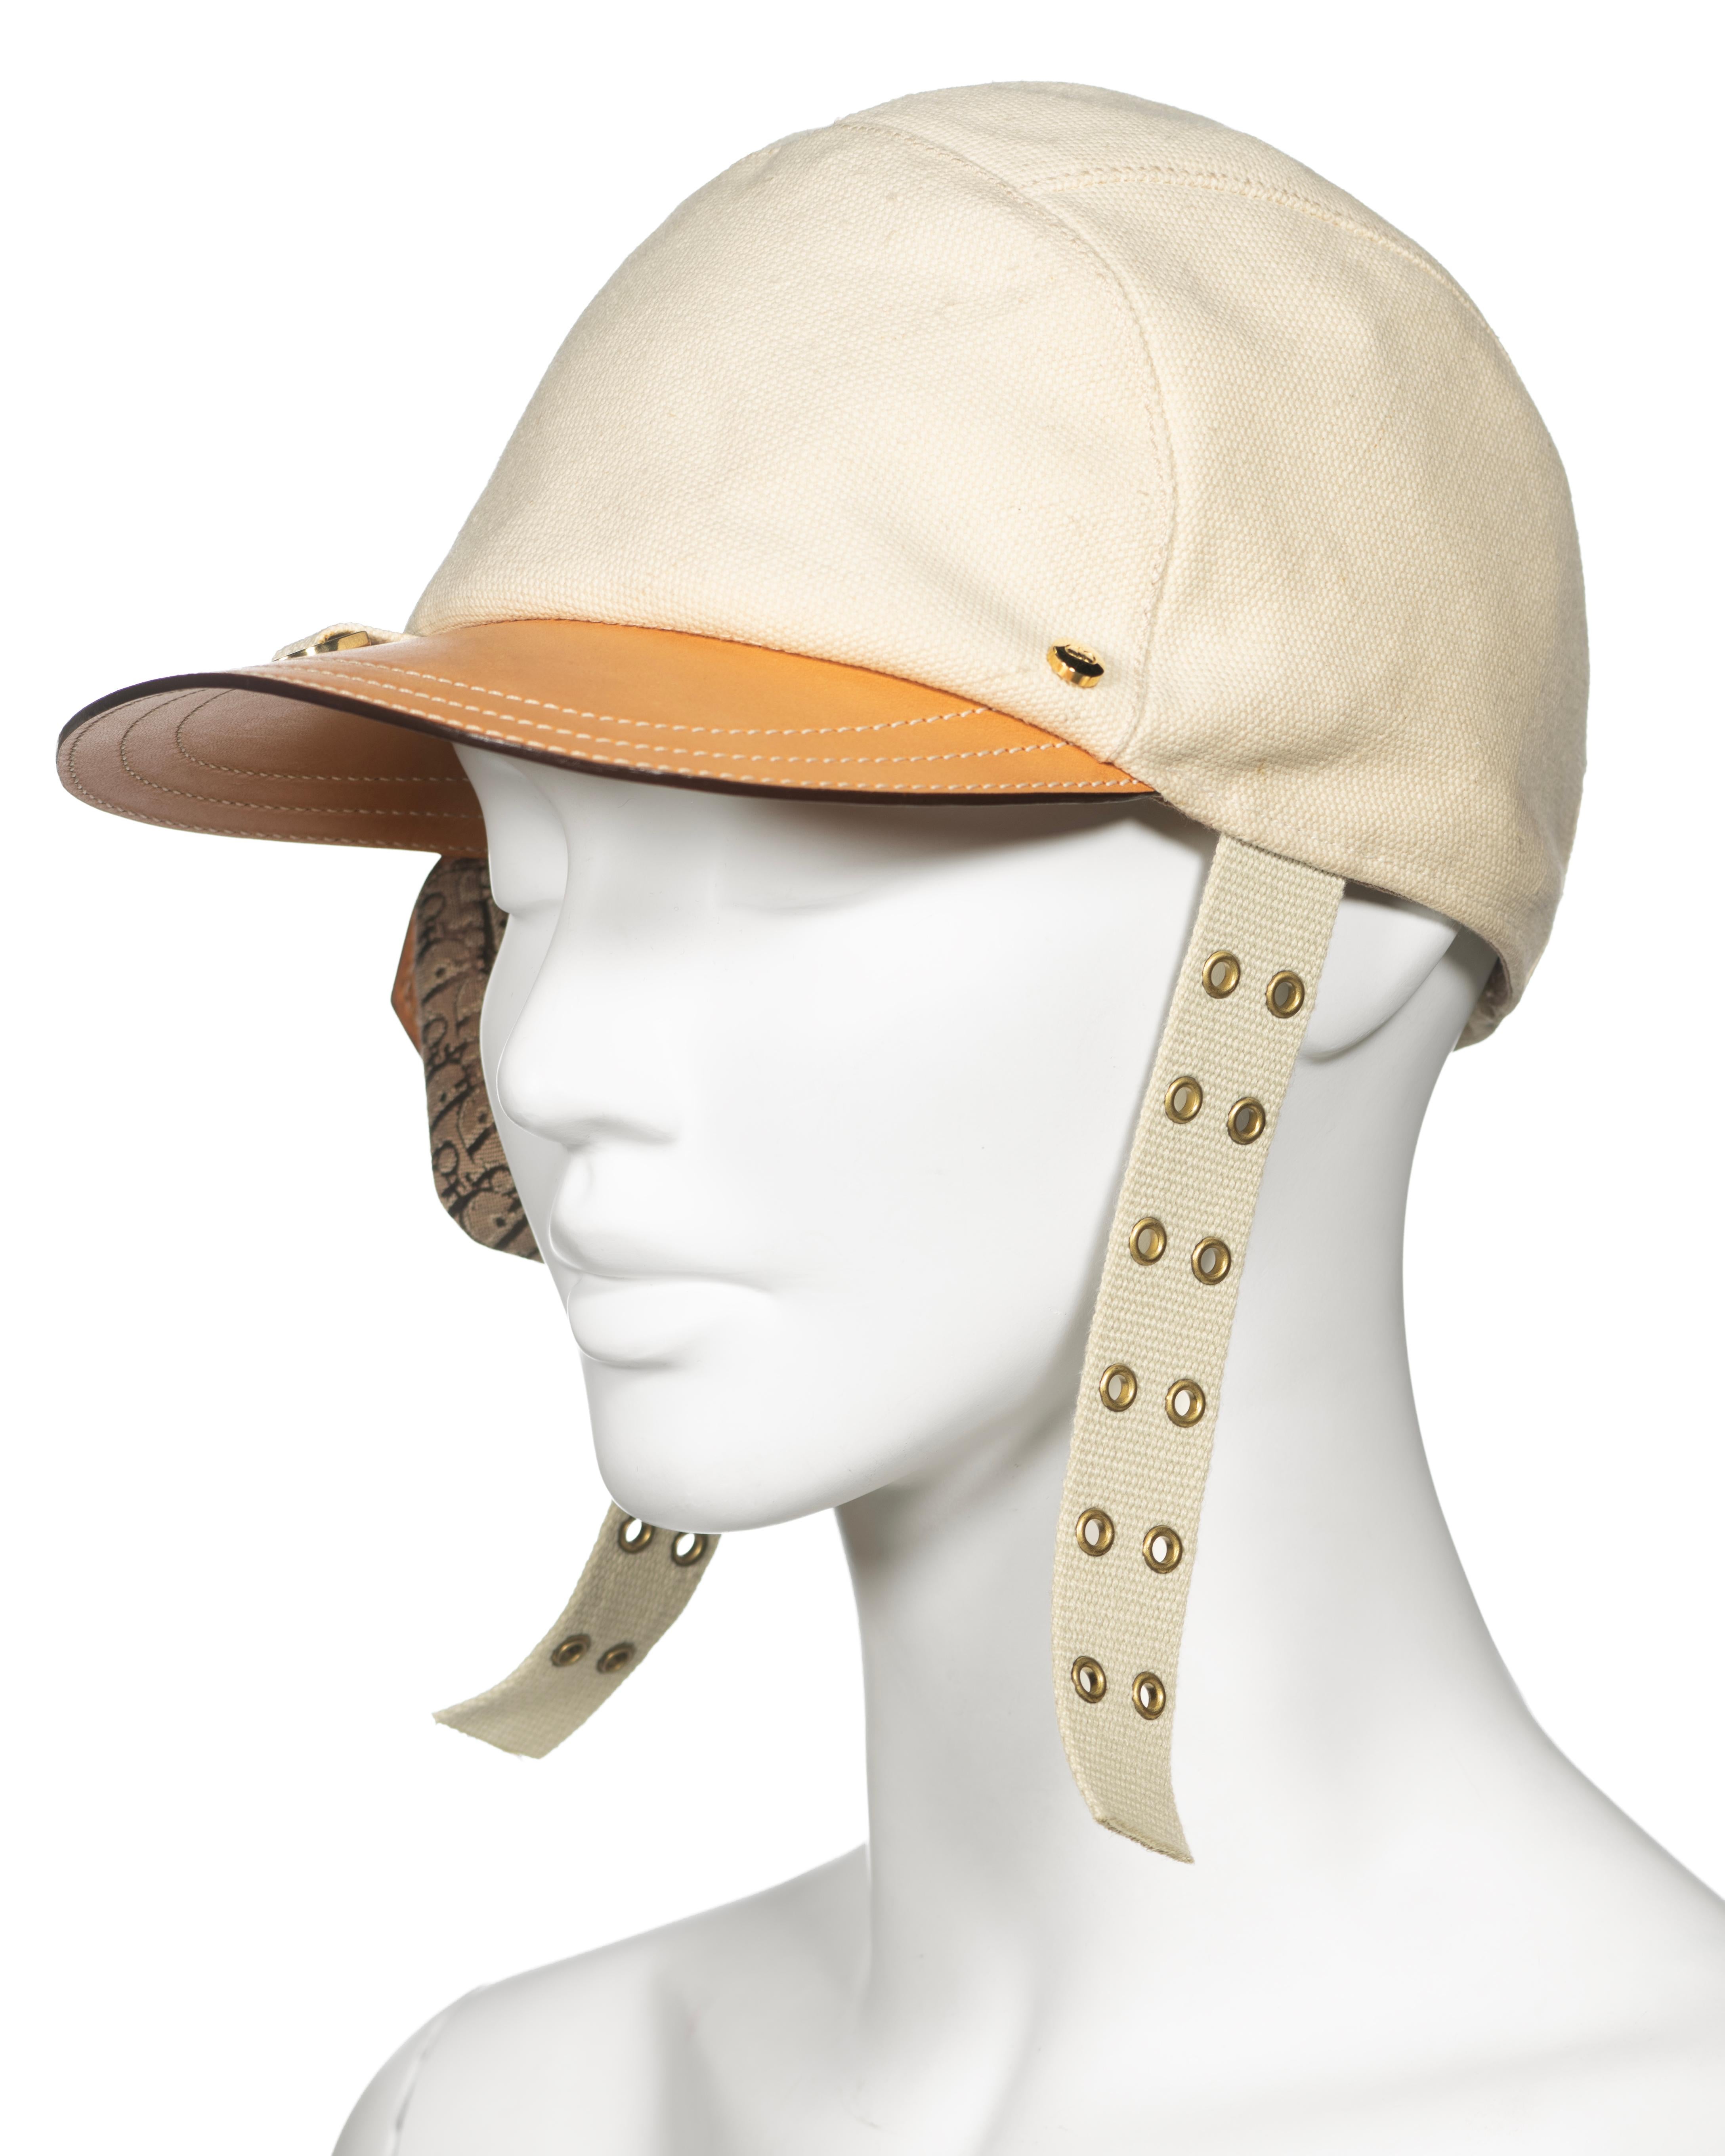 Christian Dior by John Galliano Canvas and Leather Cap with Pouch, ss 2002 For Sale 9